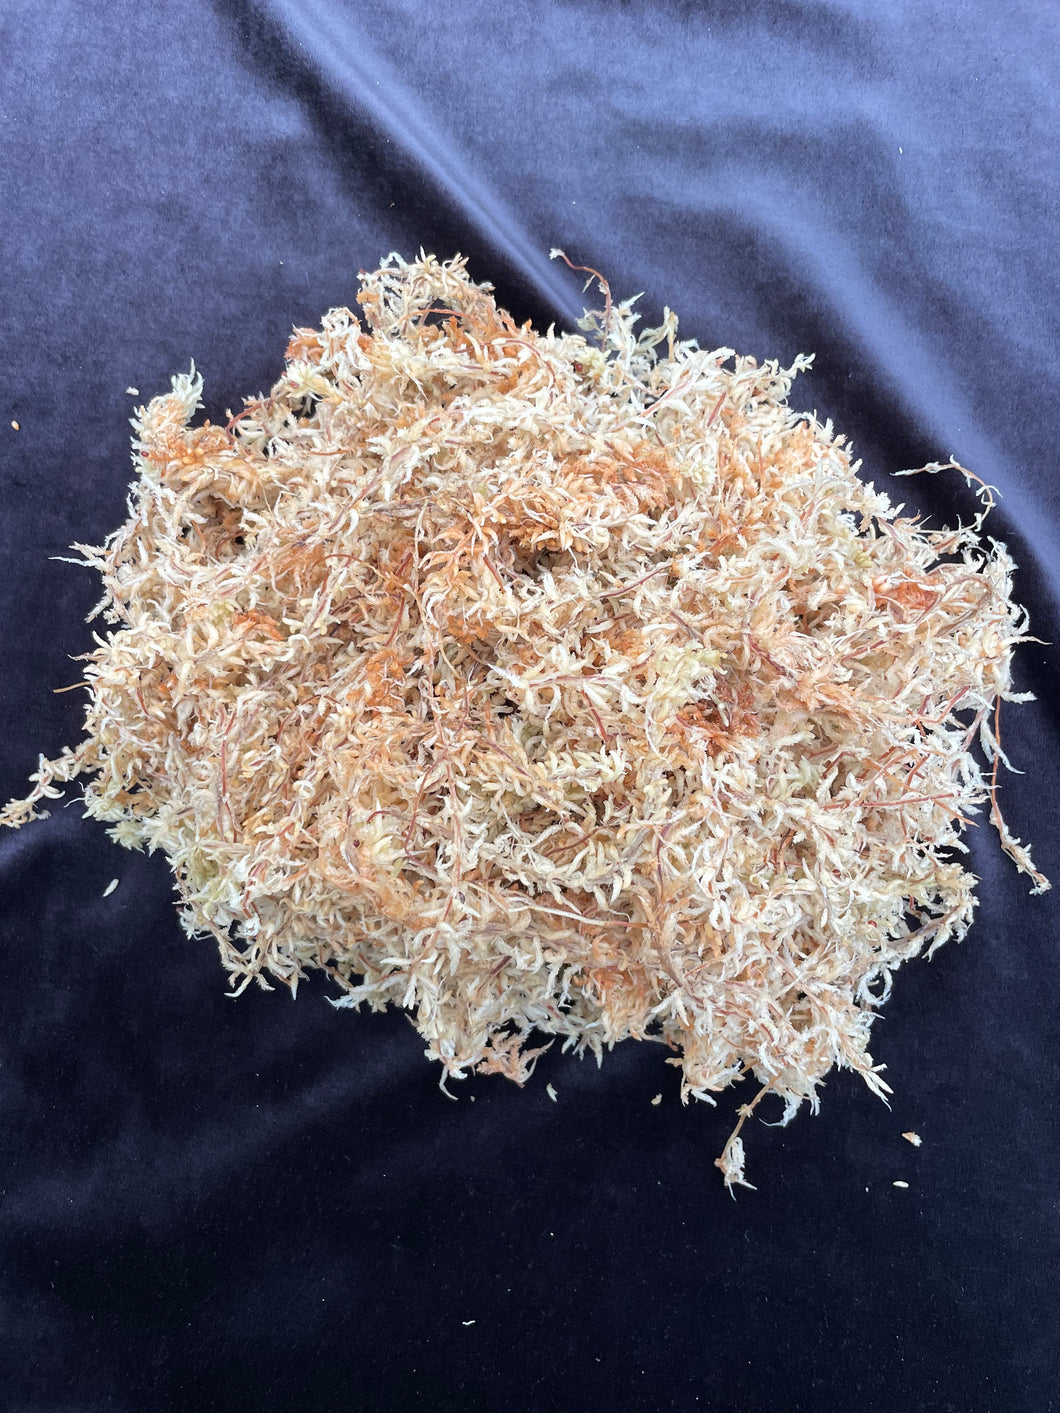 New Zealand Sphagnum Moss 500g - Green Barn Orchid and Aroid Supplies